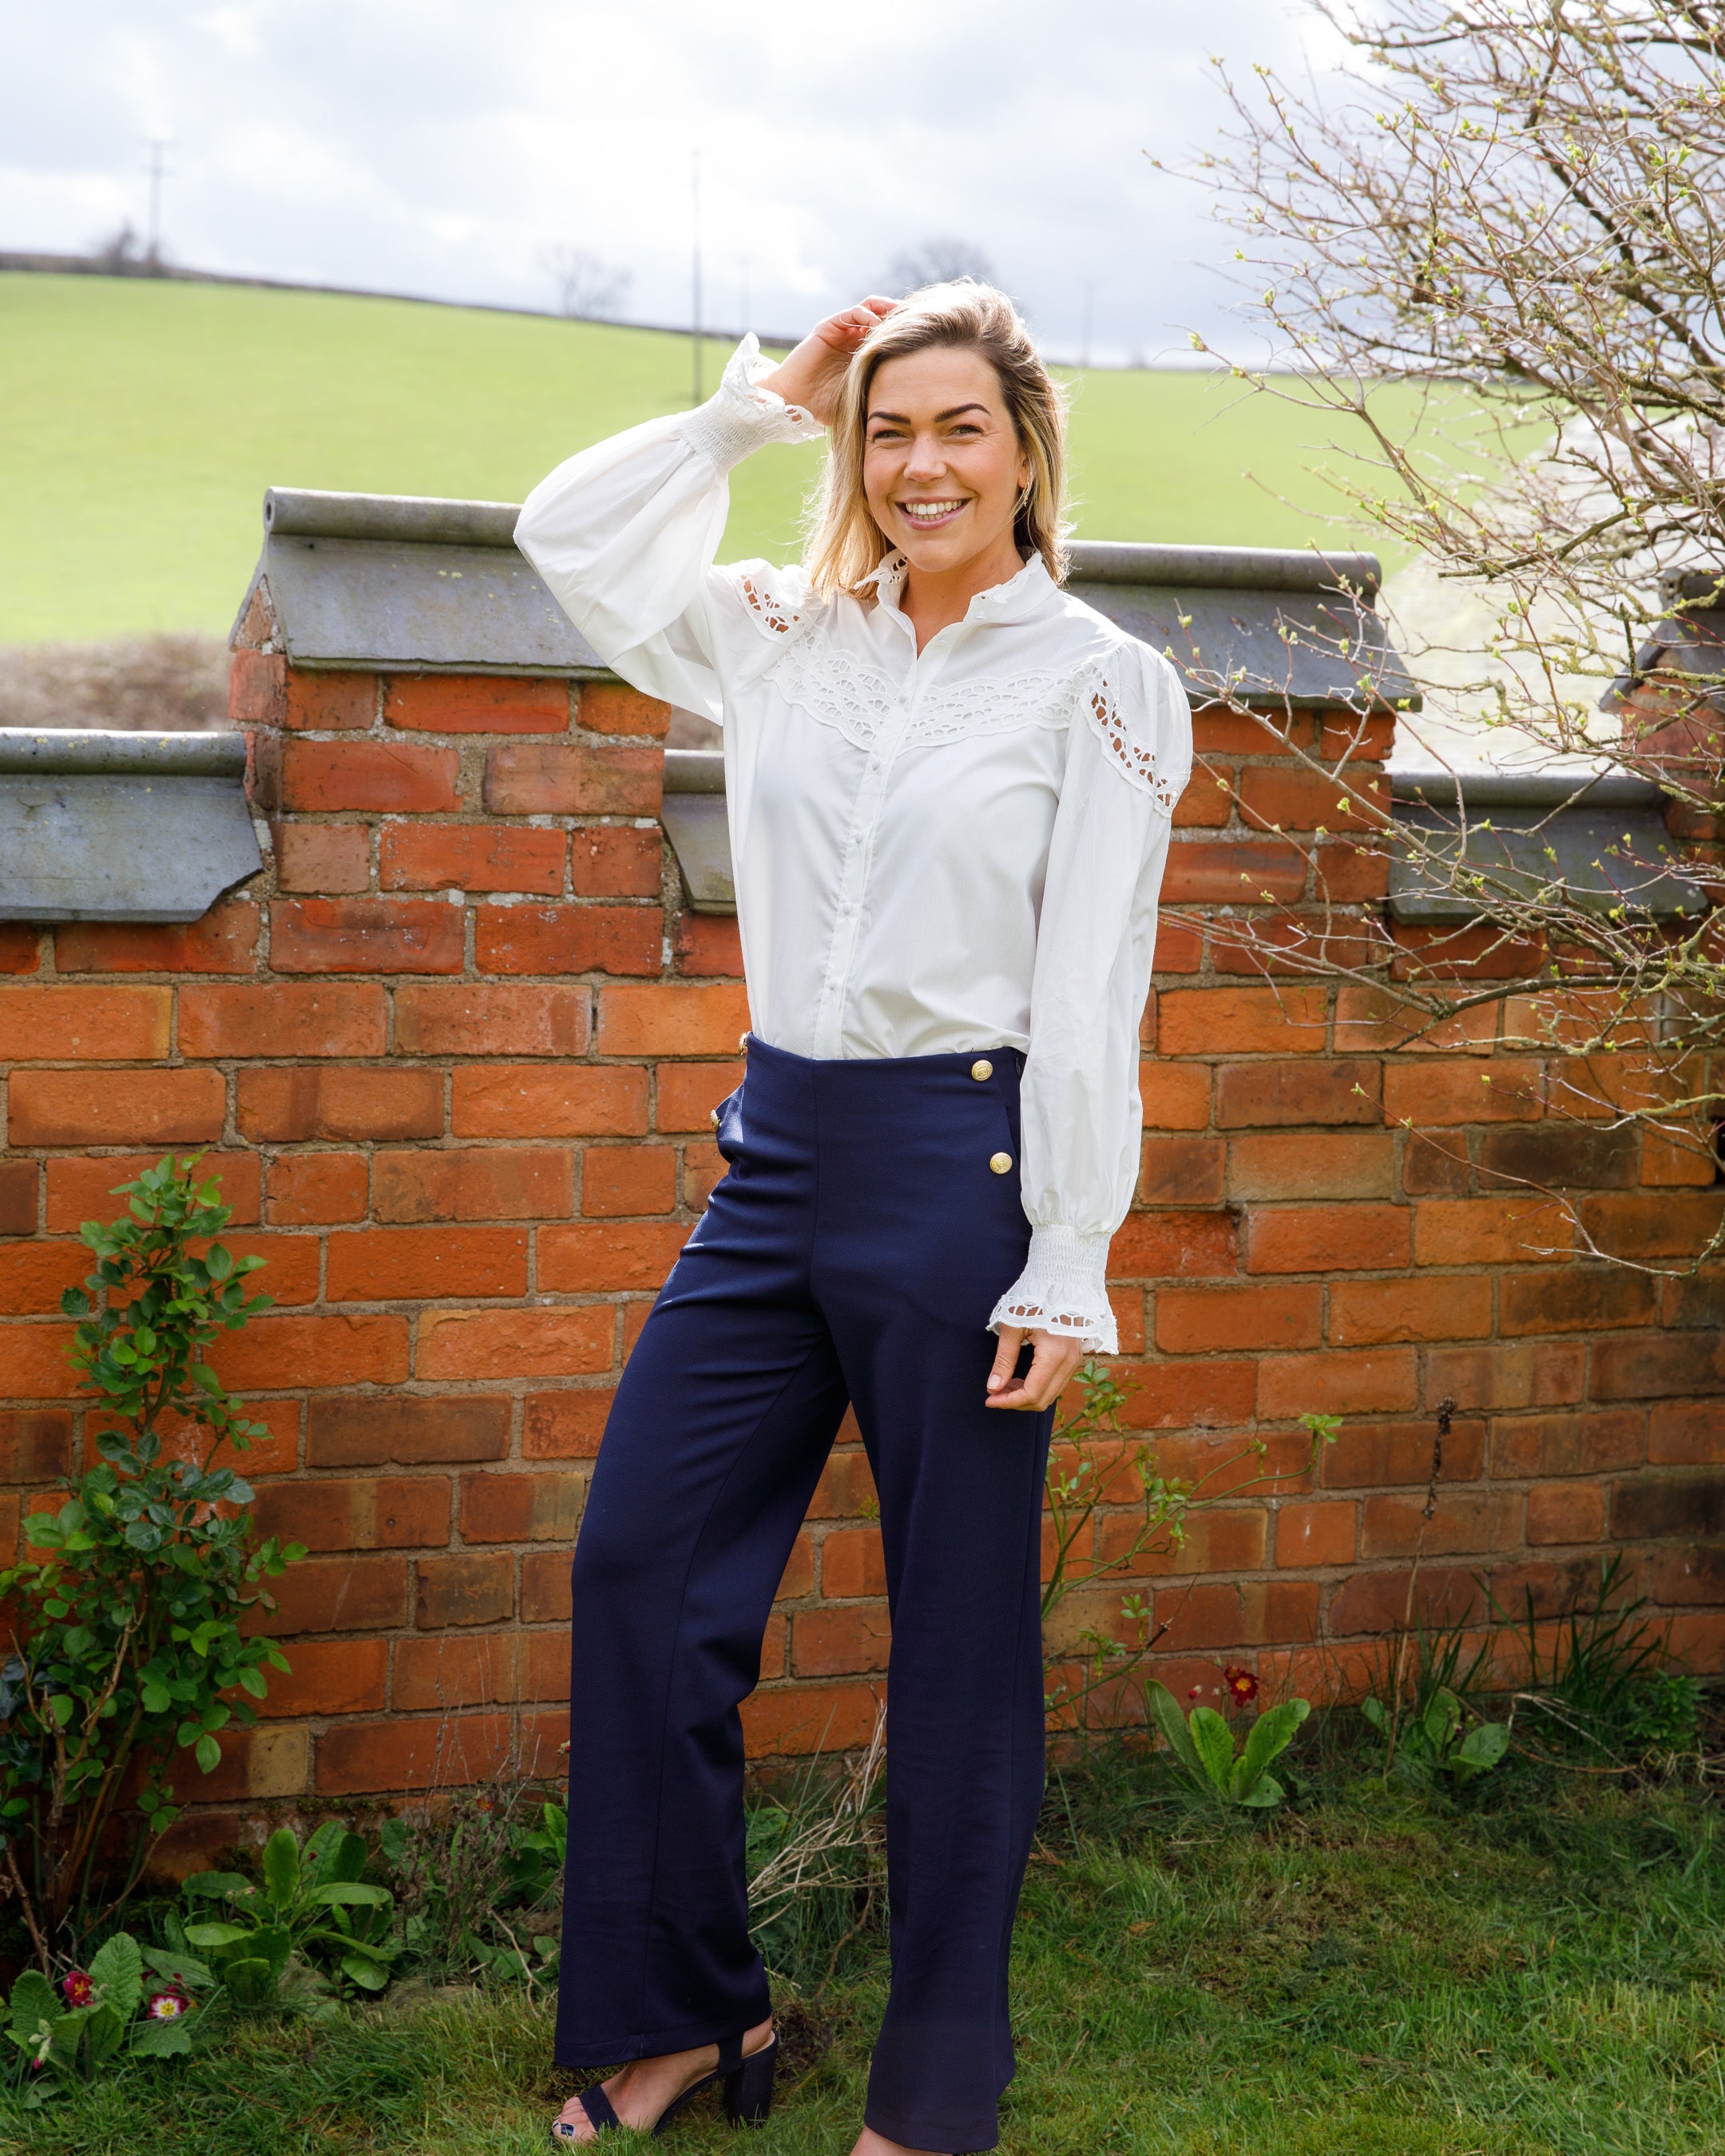 Sailor Pants - instant vintage style at DeadlyistheFemale.com